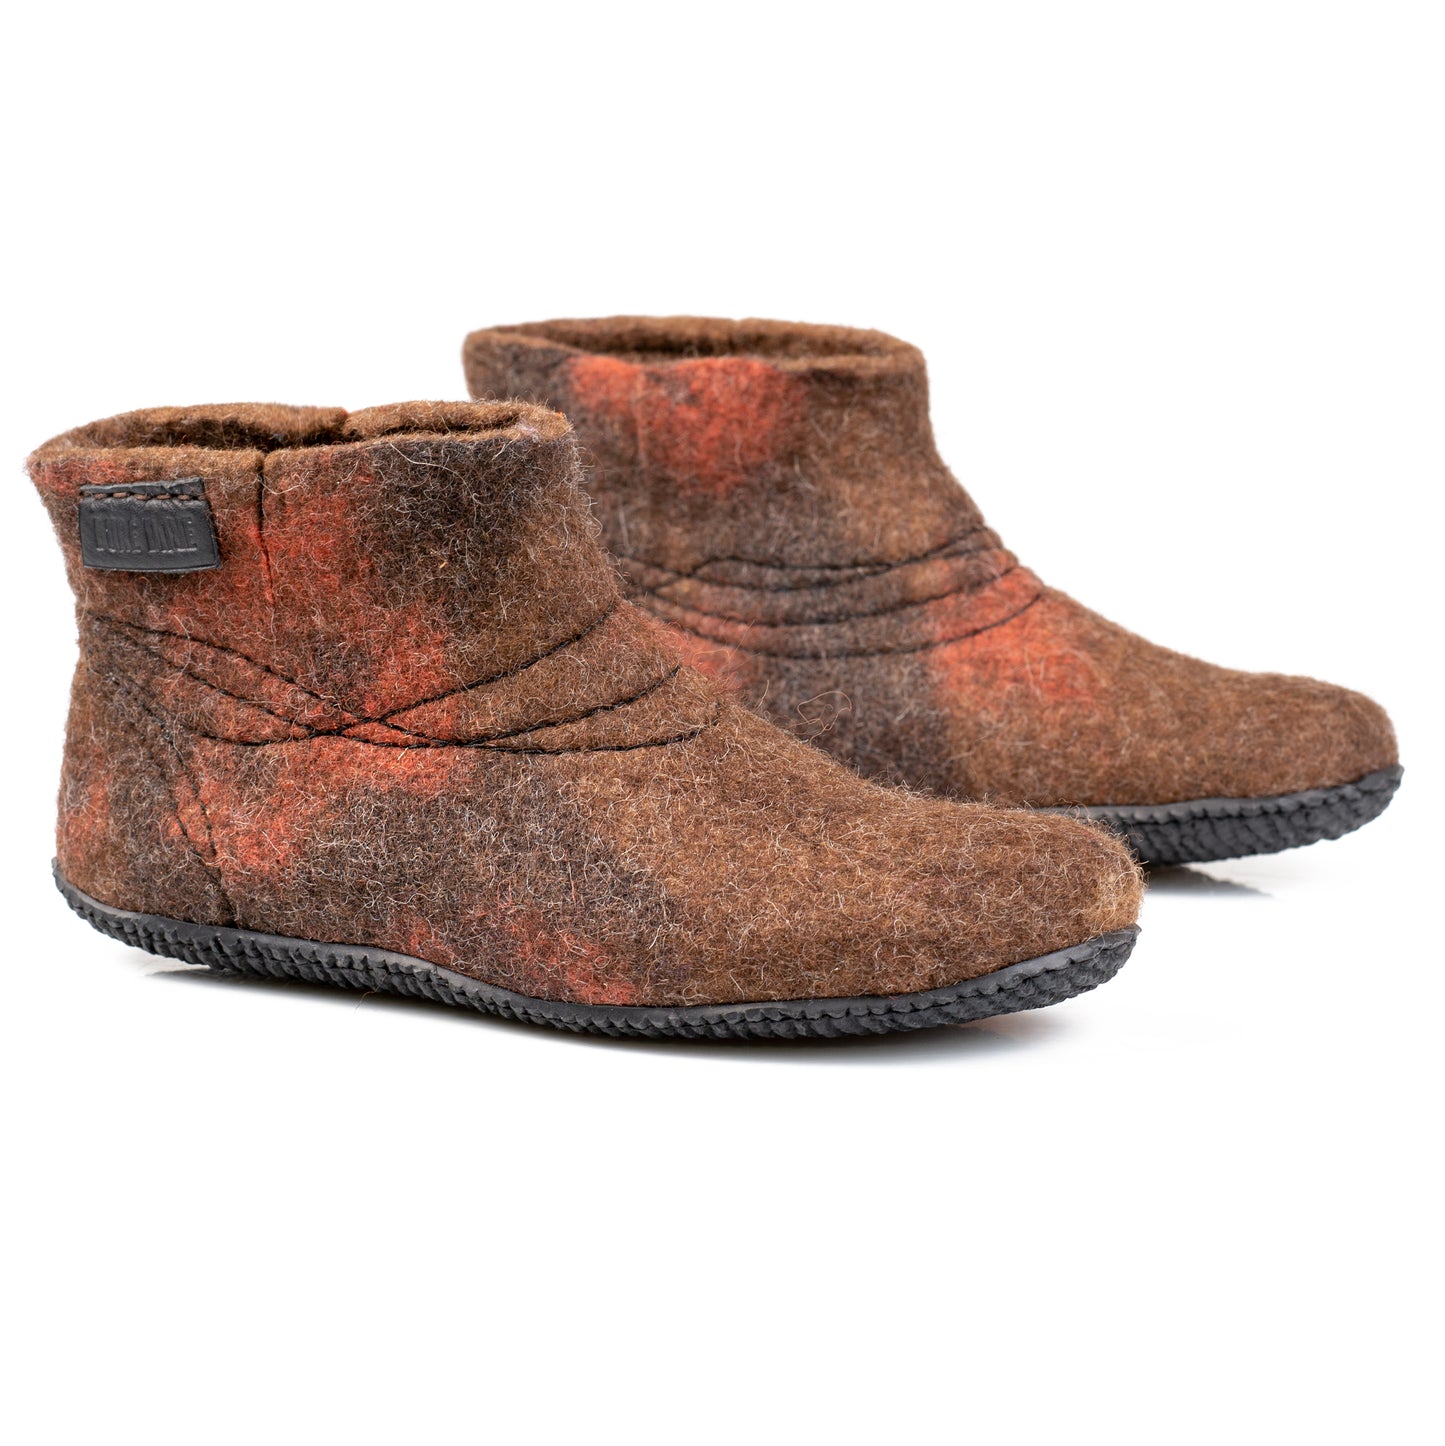 Brown felted wool ankle boots with sturdy stitches